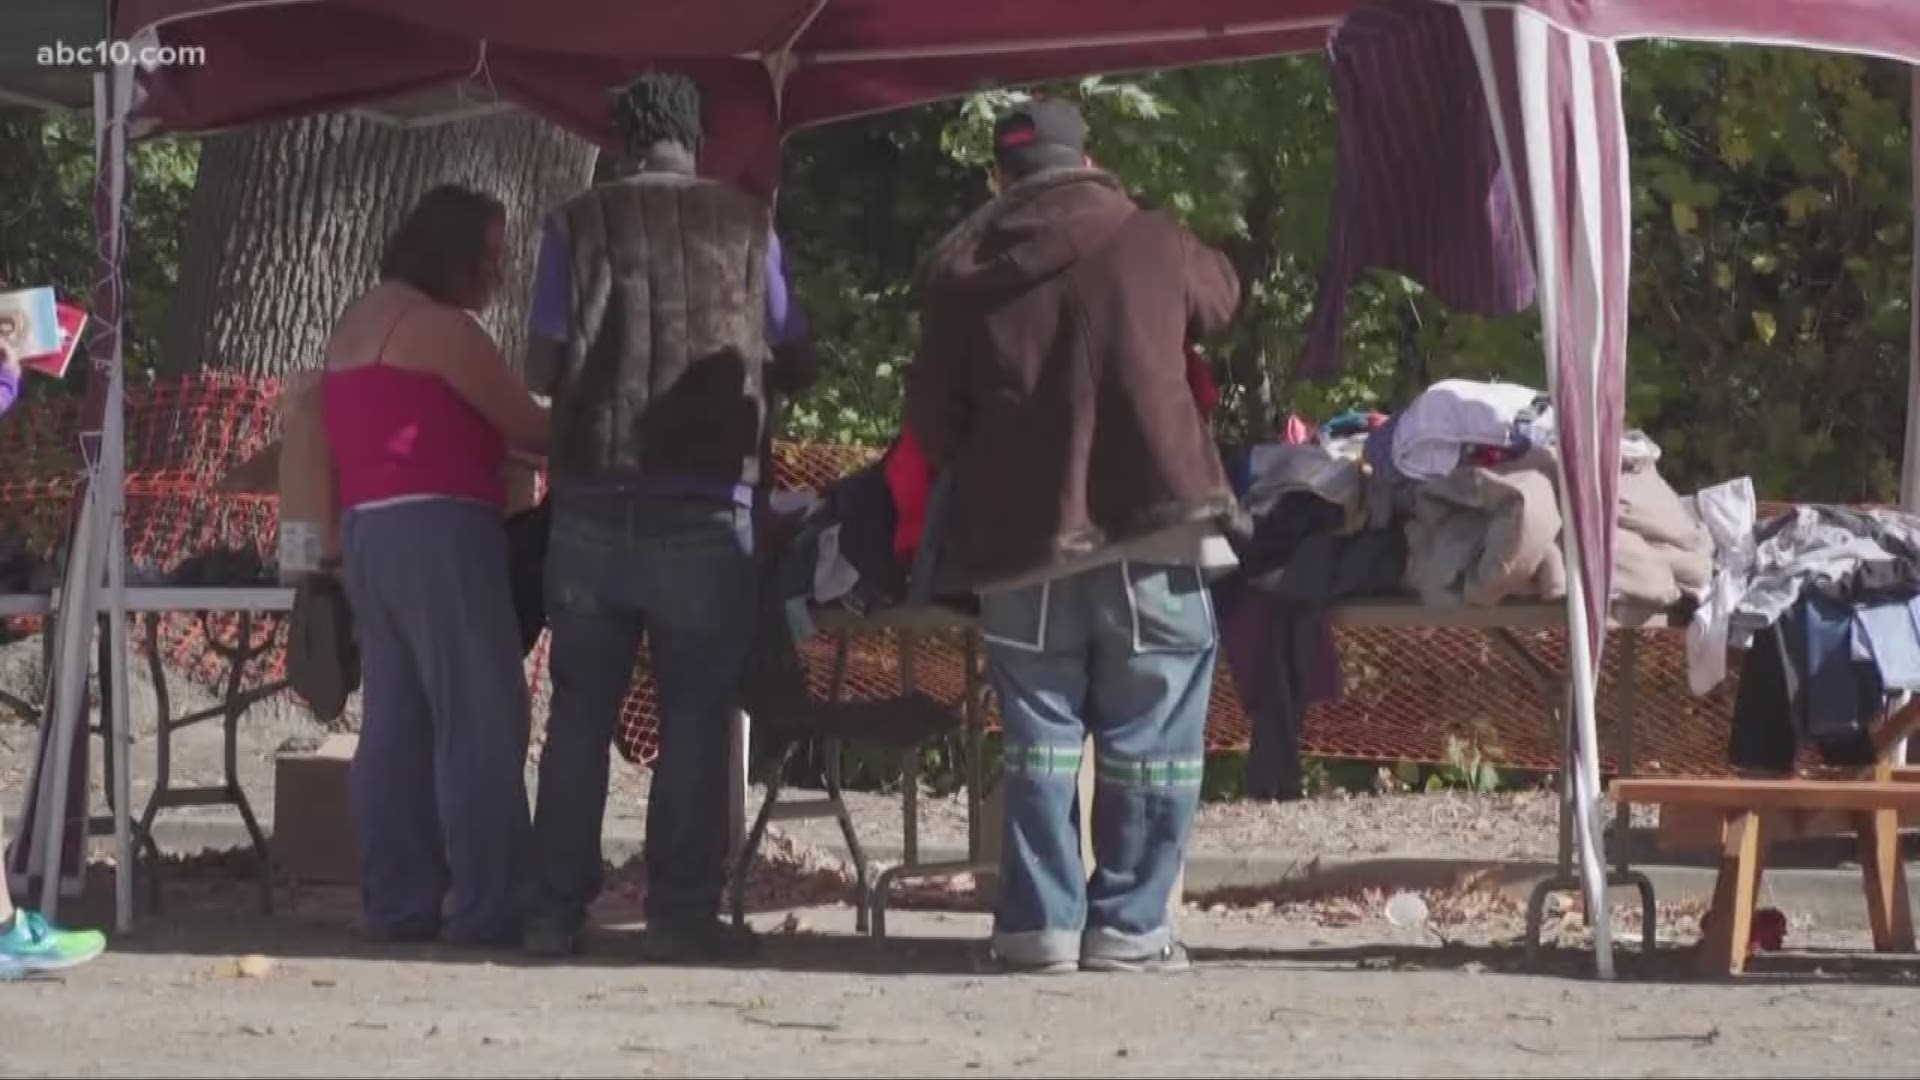 Beard Brook Park is serving as a temporary solution to the homeless problem in Modesto.